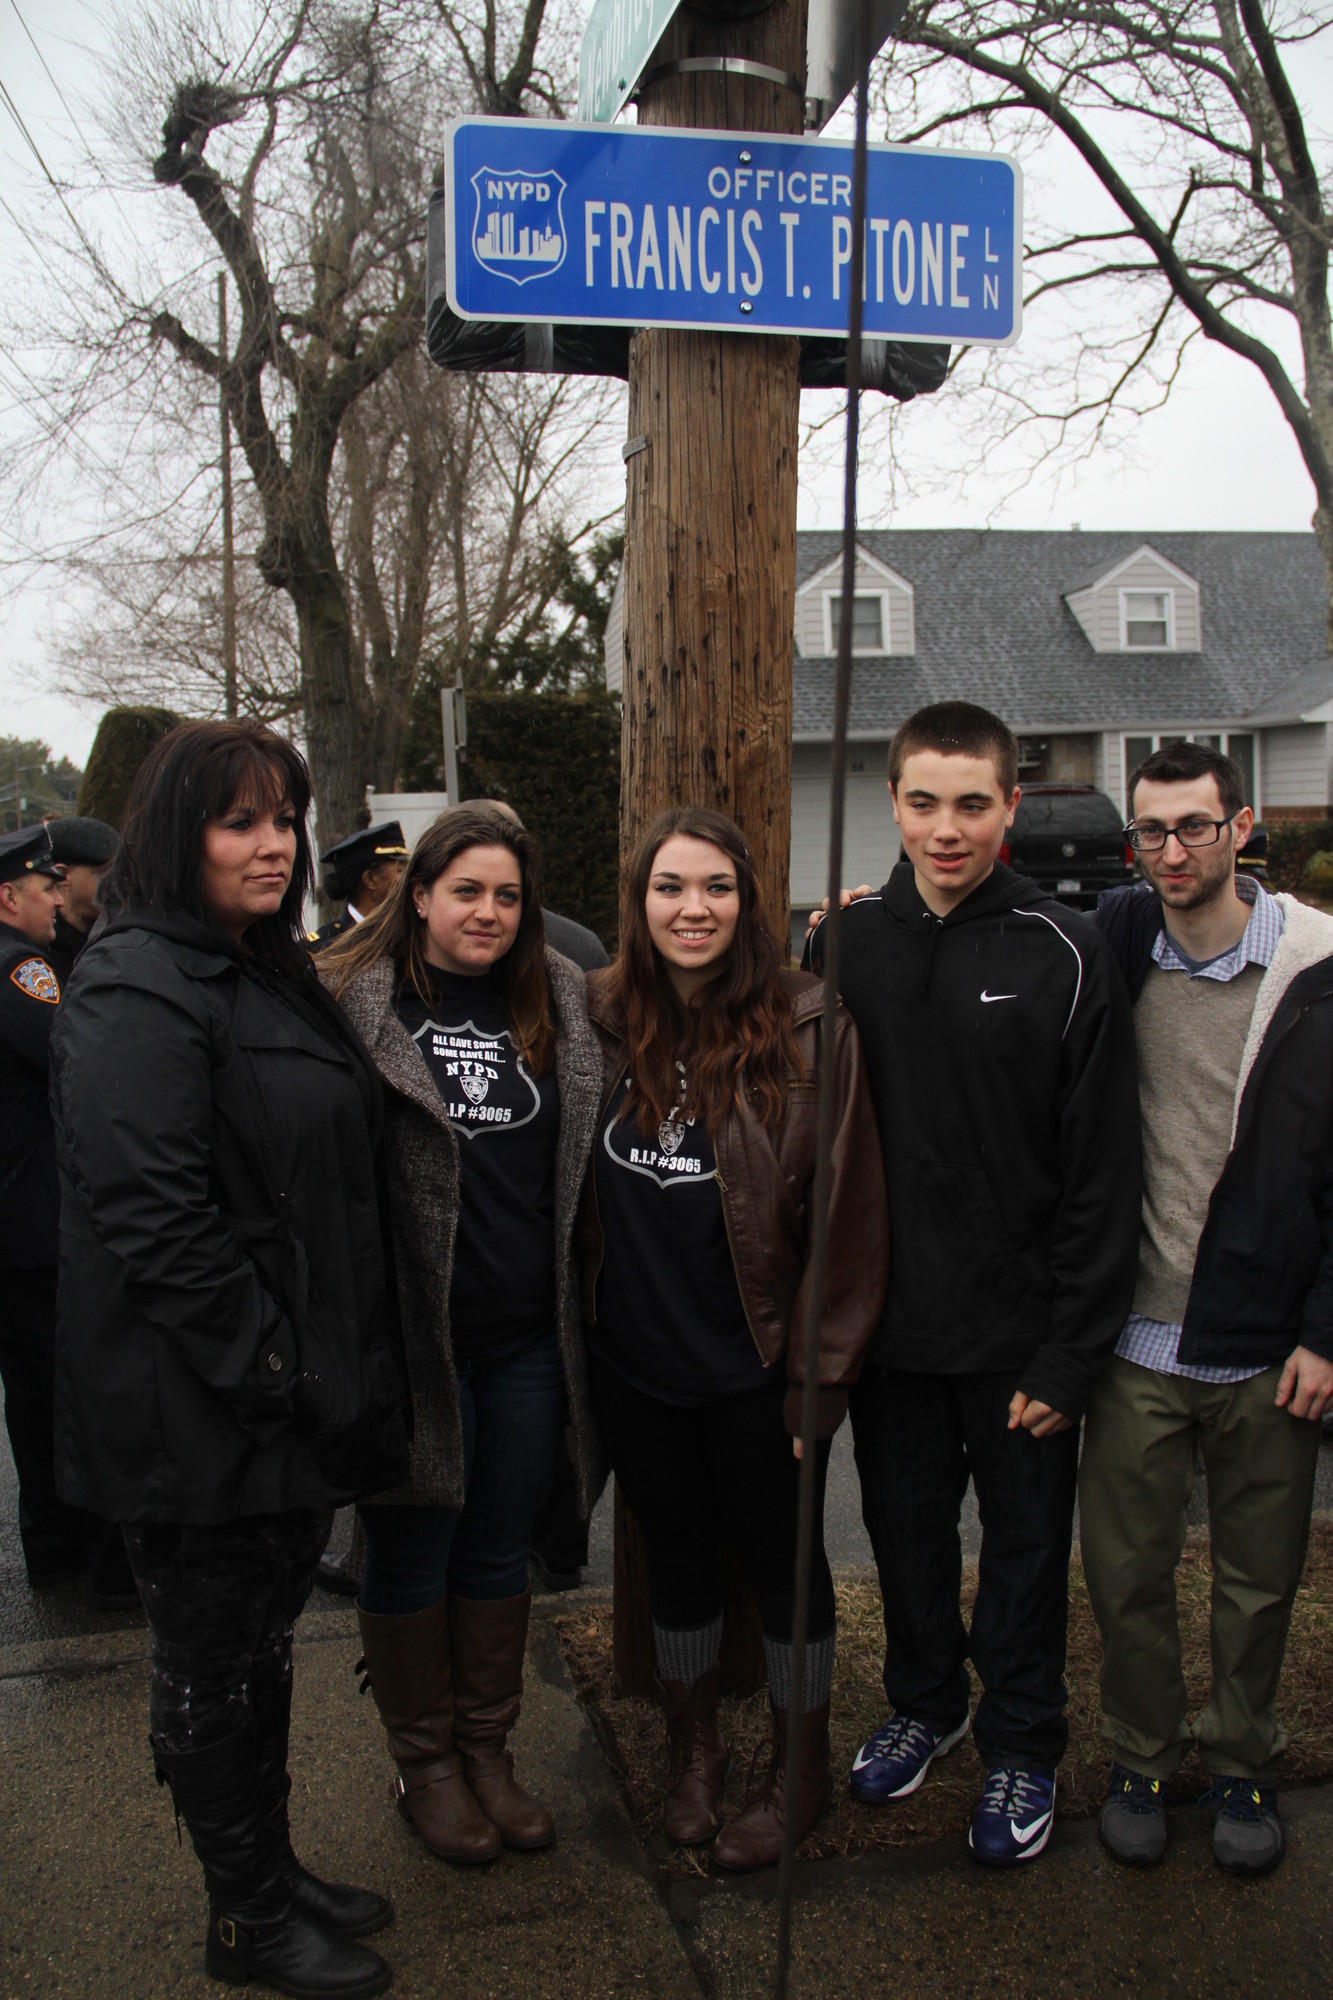 The Pitone family, from left, Linda, Nicole, Shannon, Kyle and Erik, during last Saturday’s street dedication ceremony.